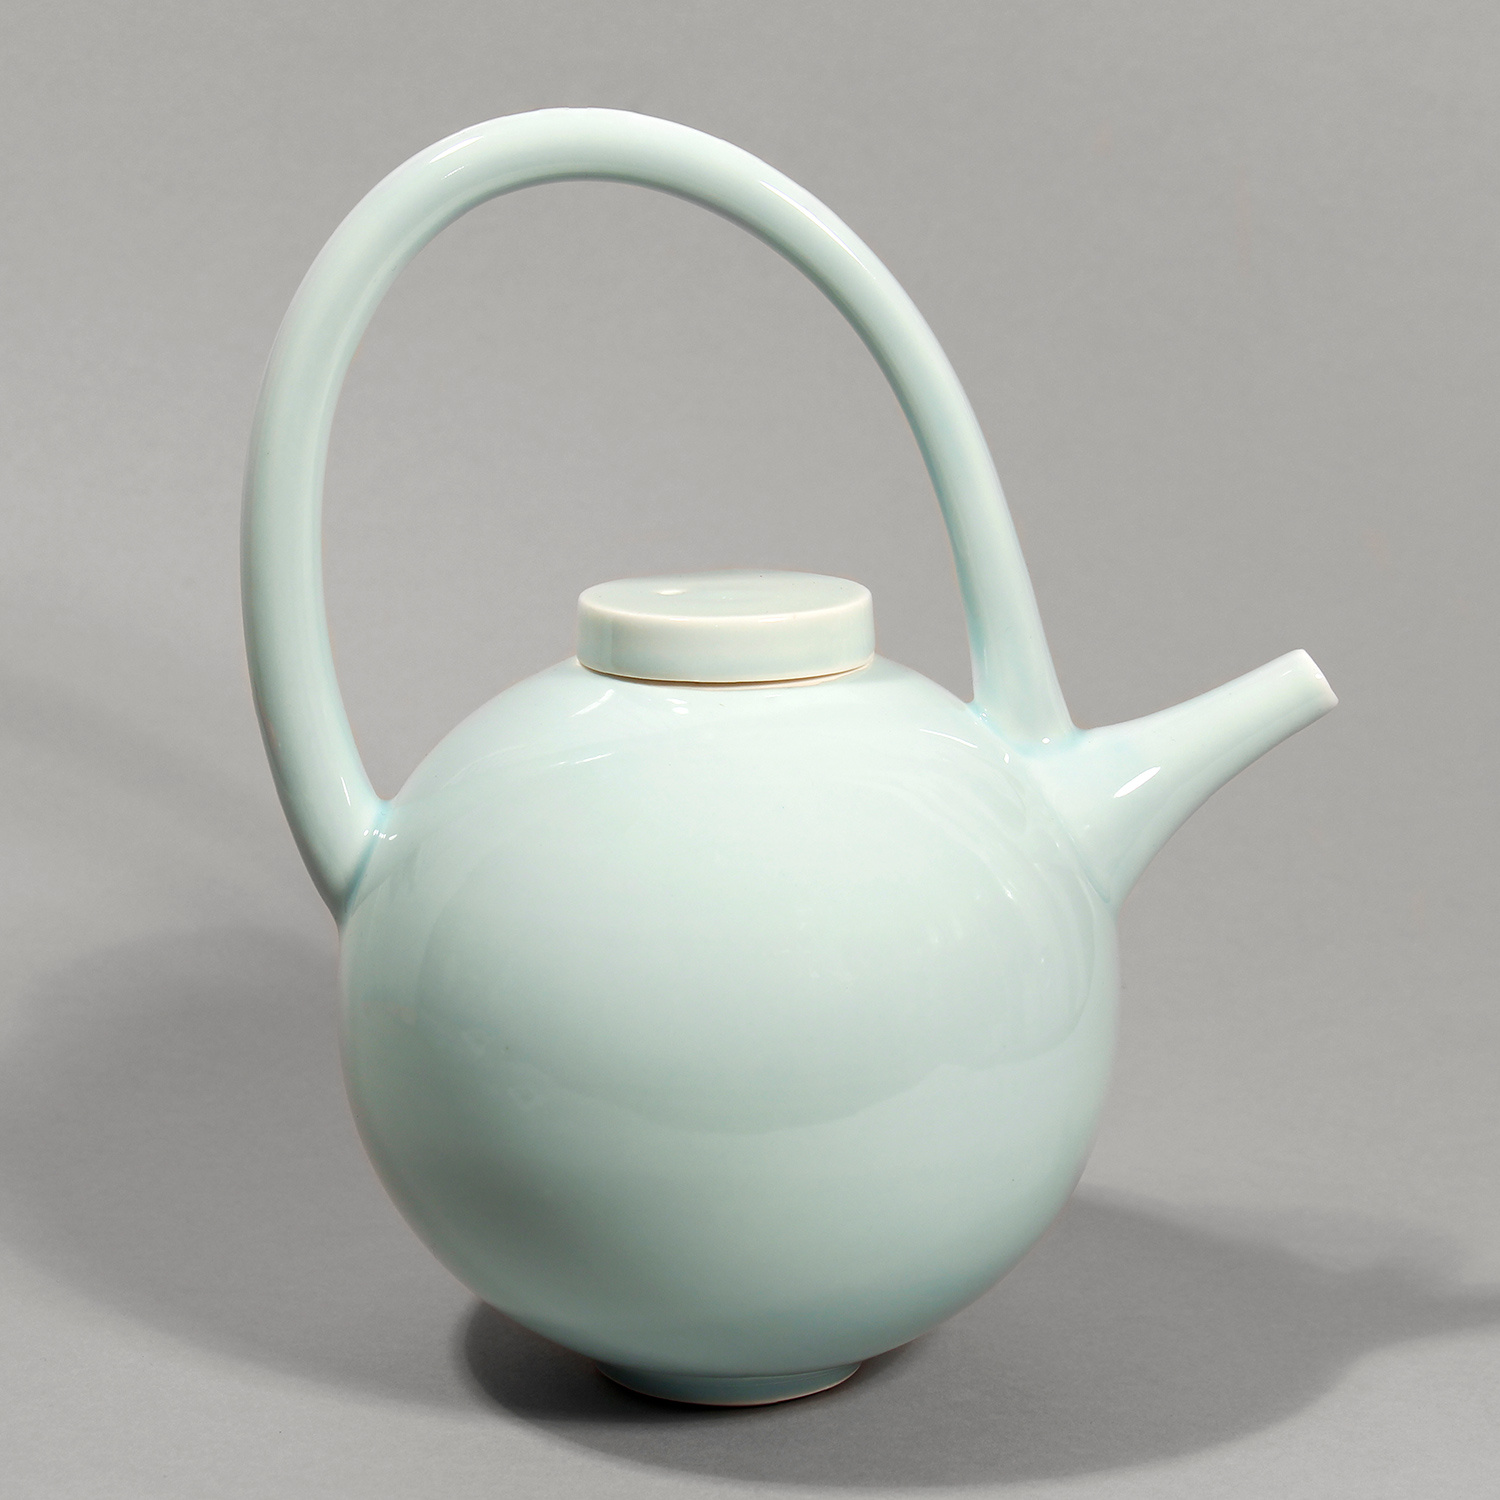 Round Teapot by Tricia Thom